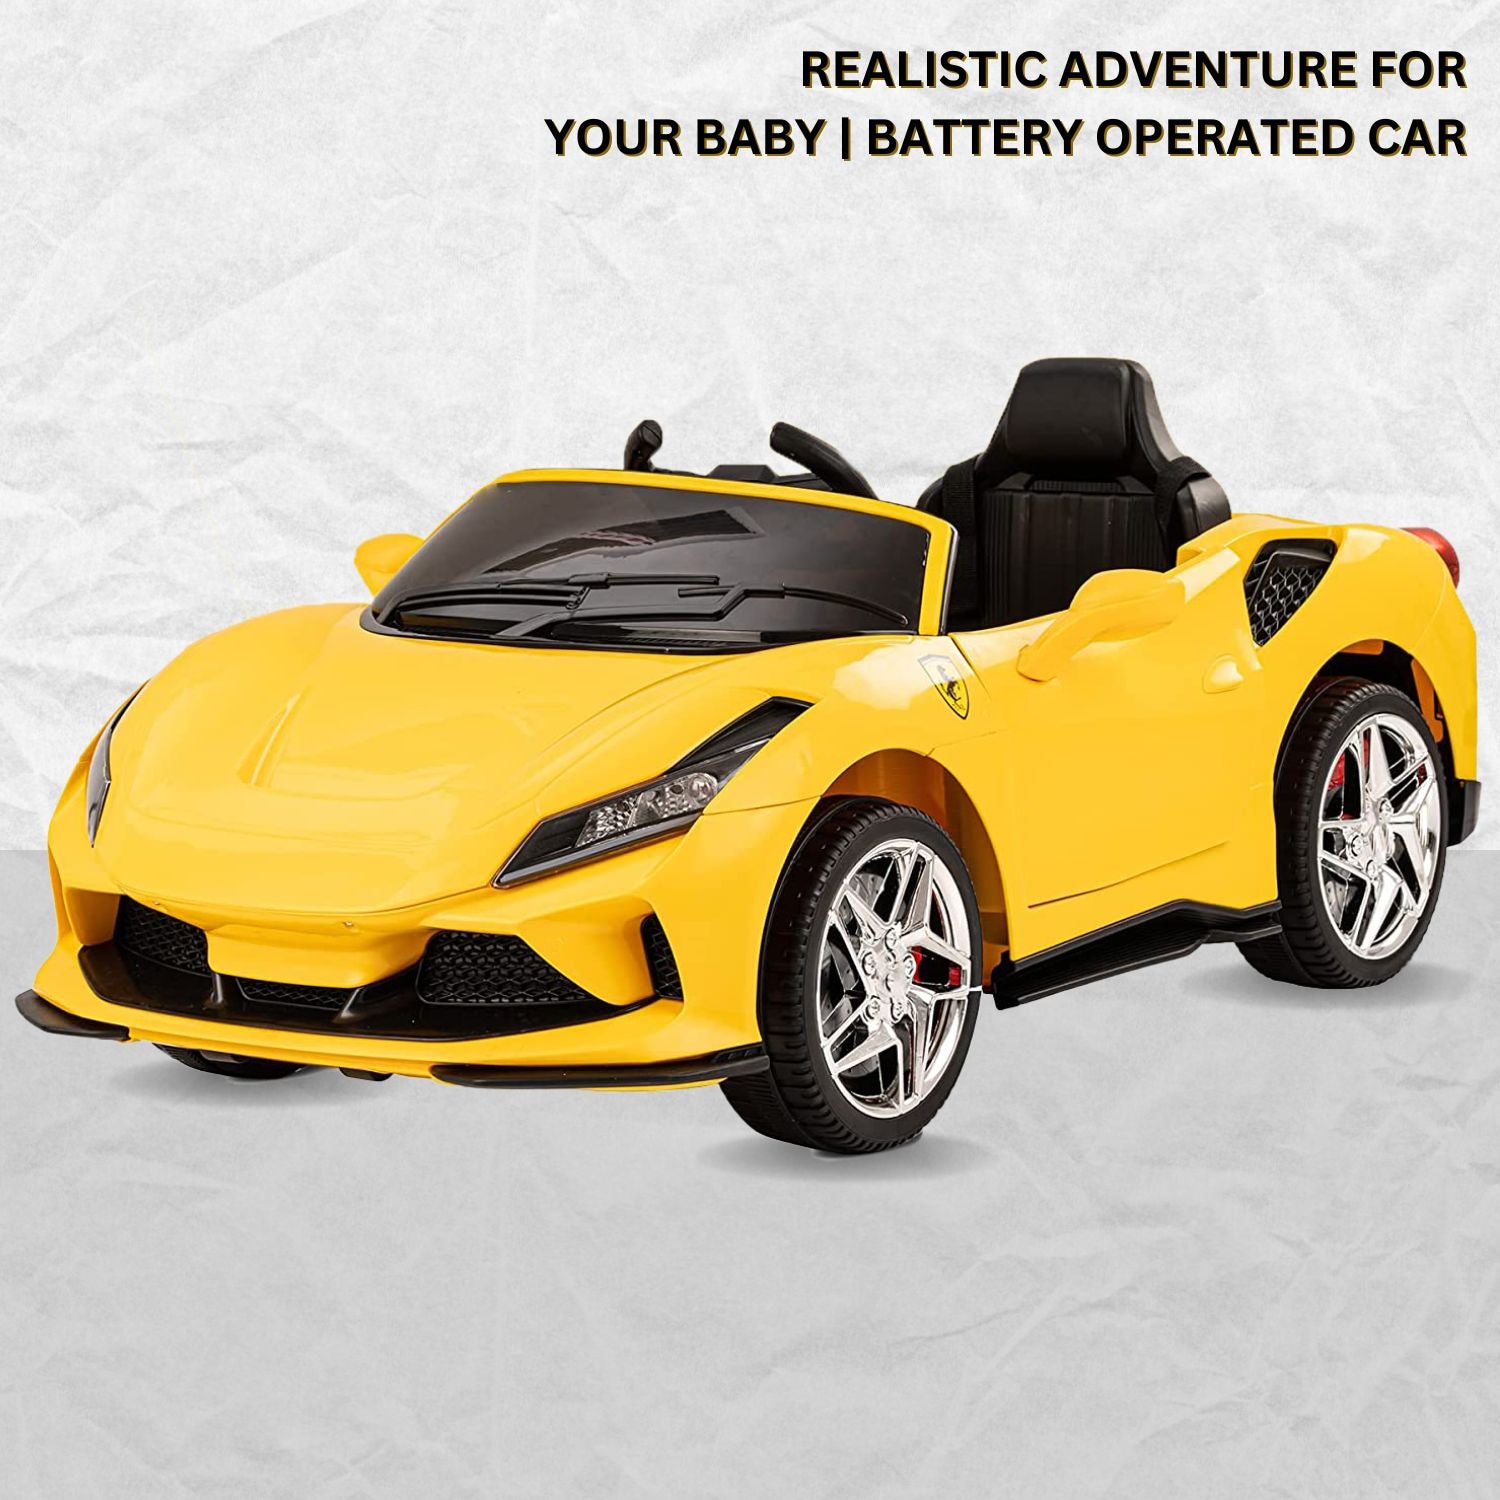 Baby Moo Ferrari F8 12V Battery Operated Ride On Car for Kids | Remote Control | Rechargeable Battery | USB MP3 Player | Ages 2-8 - Yellow - Baby Moo